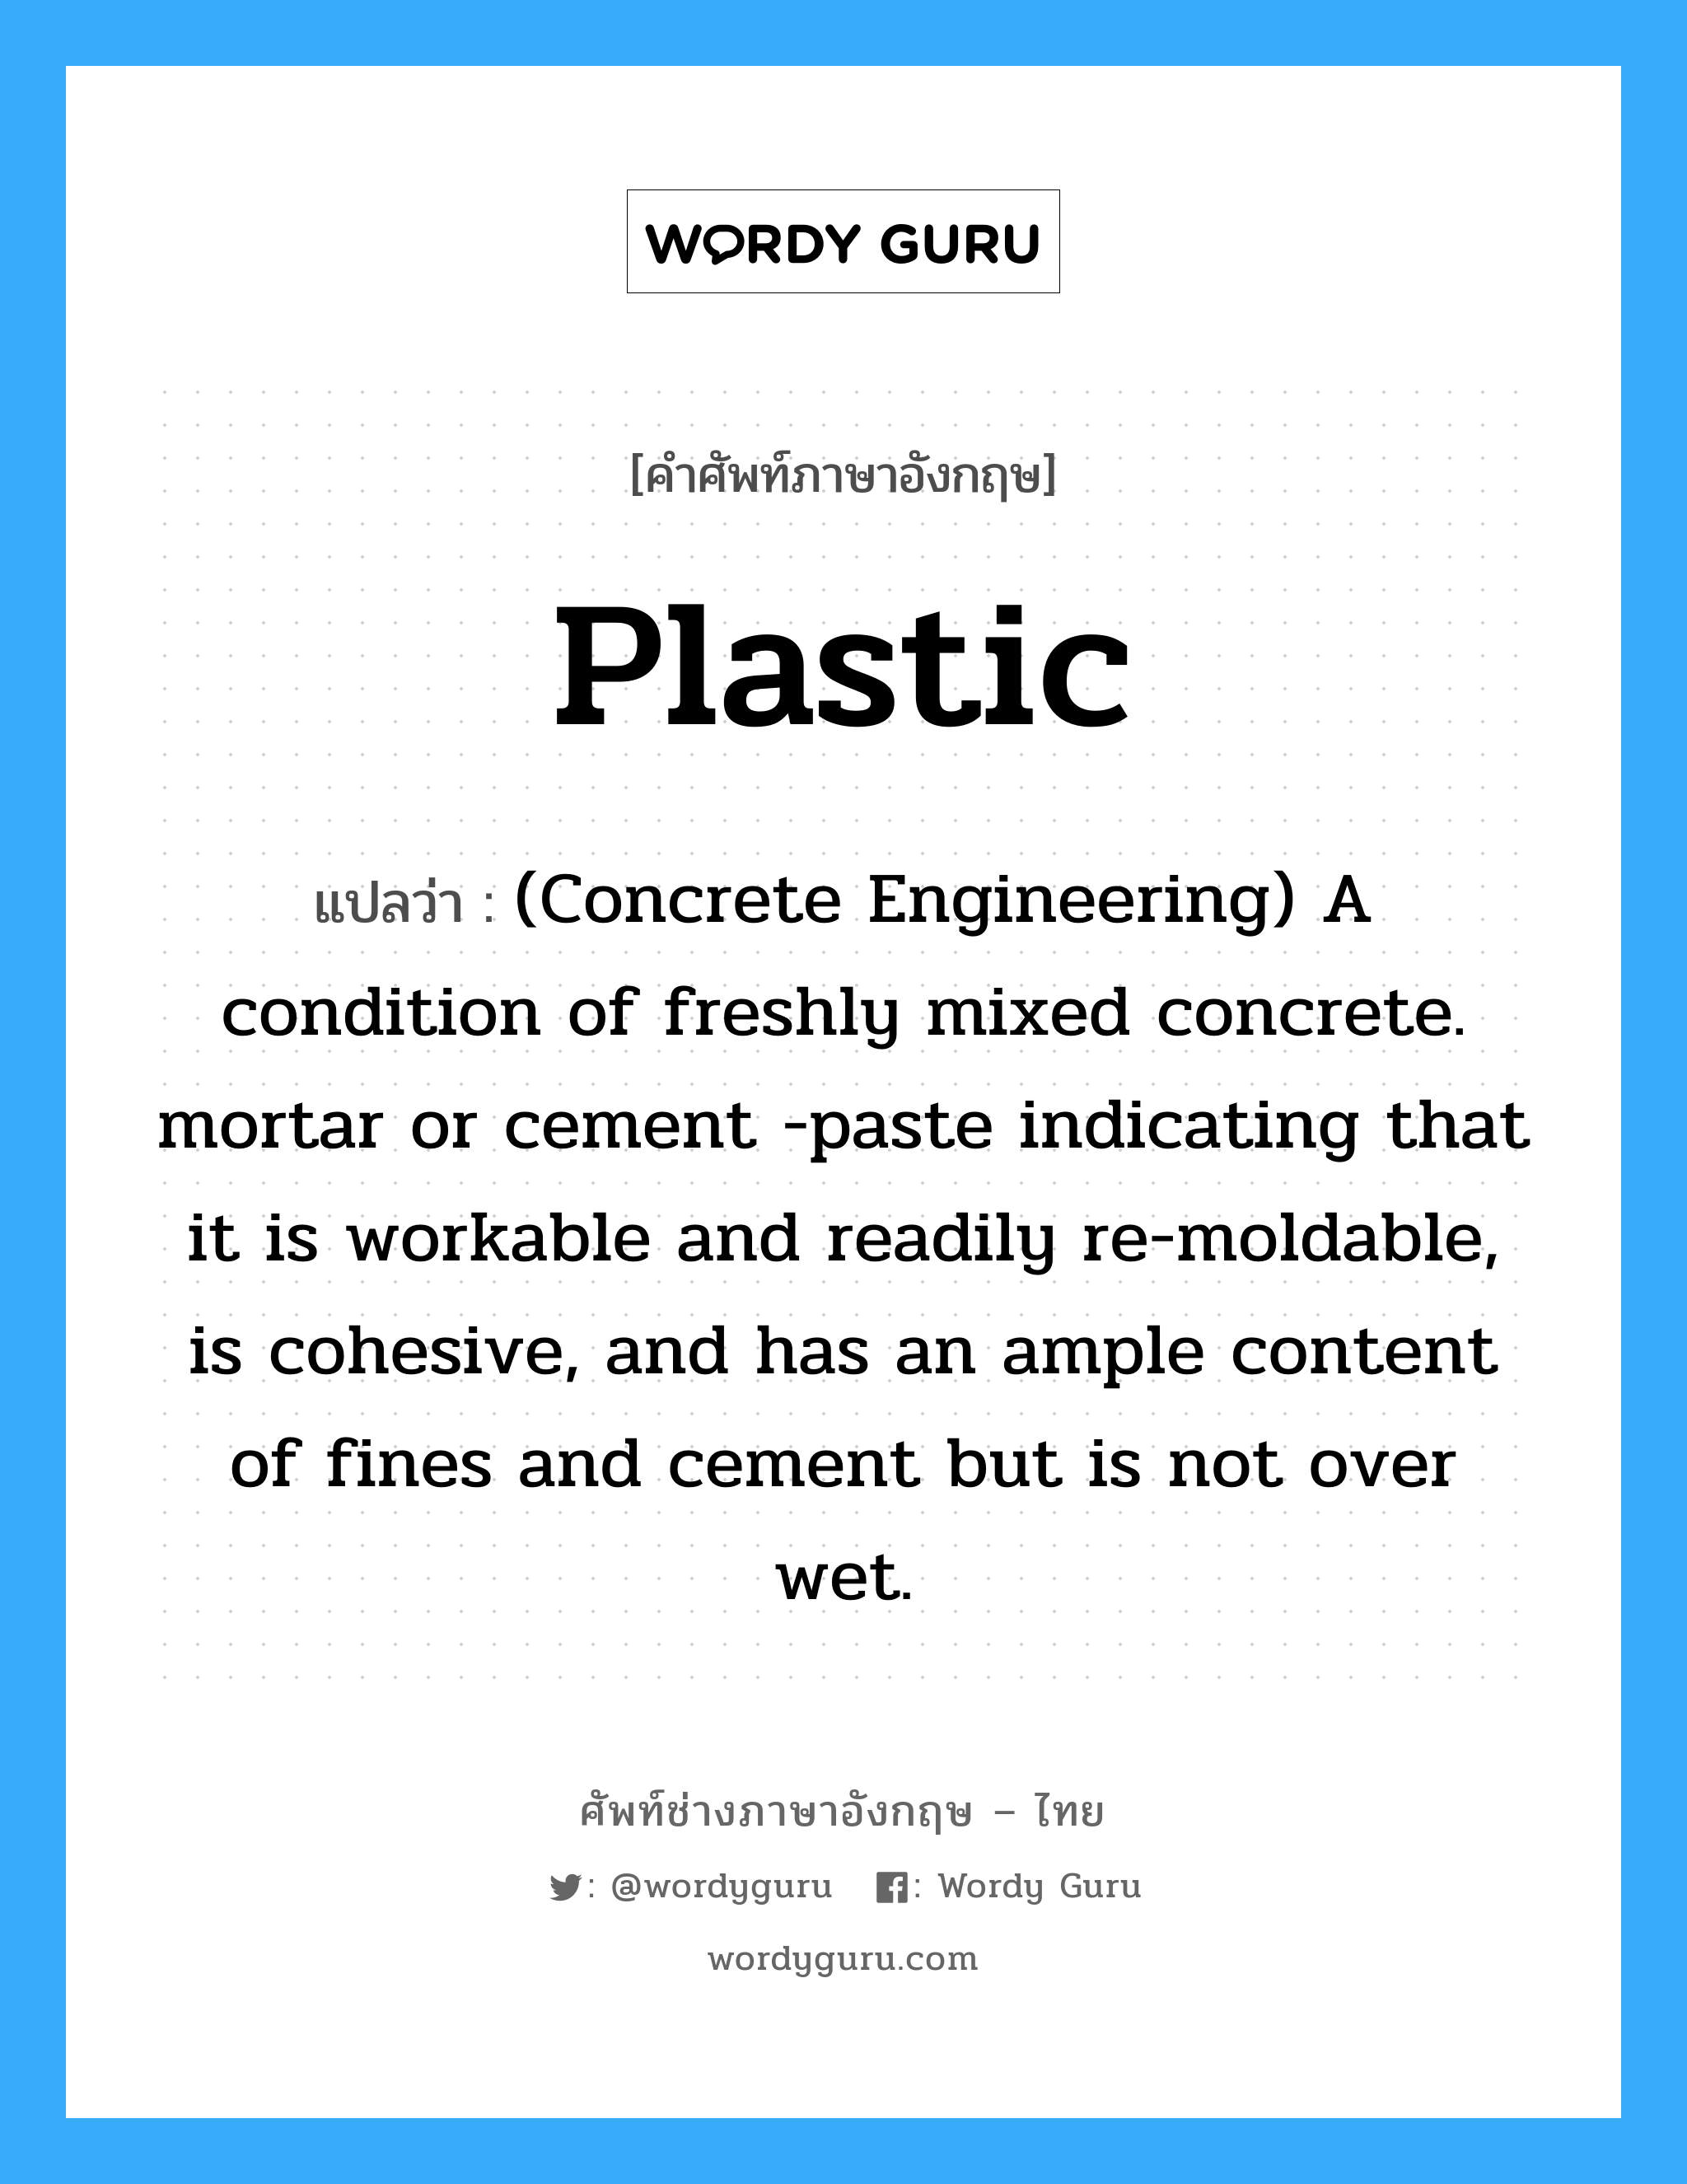 (Concrete Engineering) A condition of freshly mixed concrete. mortar or cement -paste indicating that it is workable and readily re-moldable, is cohesive, and has an ample content of fines and cement but is not over wet. ภาษาอังกฤษ?, คำศัพท์ช่างภาษาอังกฤษ - ไทย (Concrete Engineering) A condition of freshly mixed concrete. mortar or cement -paste indicating that it is workable and readily re-moldable, is cohesive, and has an ample content of fines and cement but is not over wet. คำศัพท์ภาษาอังกฤษ (Concrete Engineering) A condition of freshly mixed concrete. mortar or cement -paste indicating that it is workable and readily re-moldable, is cohesive, and has an ample content of fines and cement but is not over wet. แปลว่า Plastic